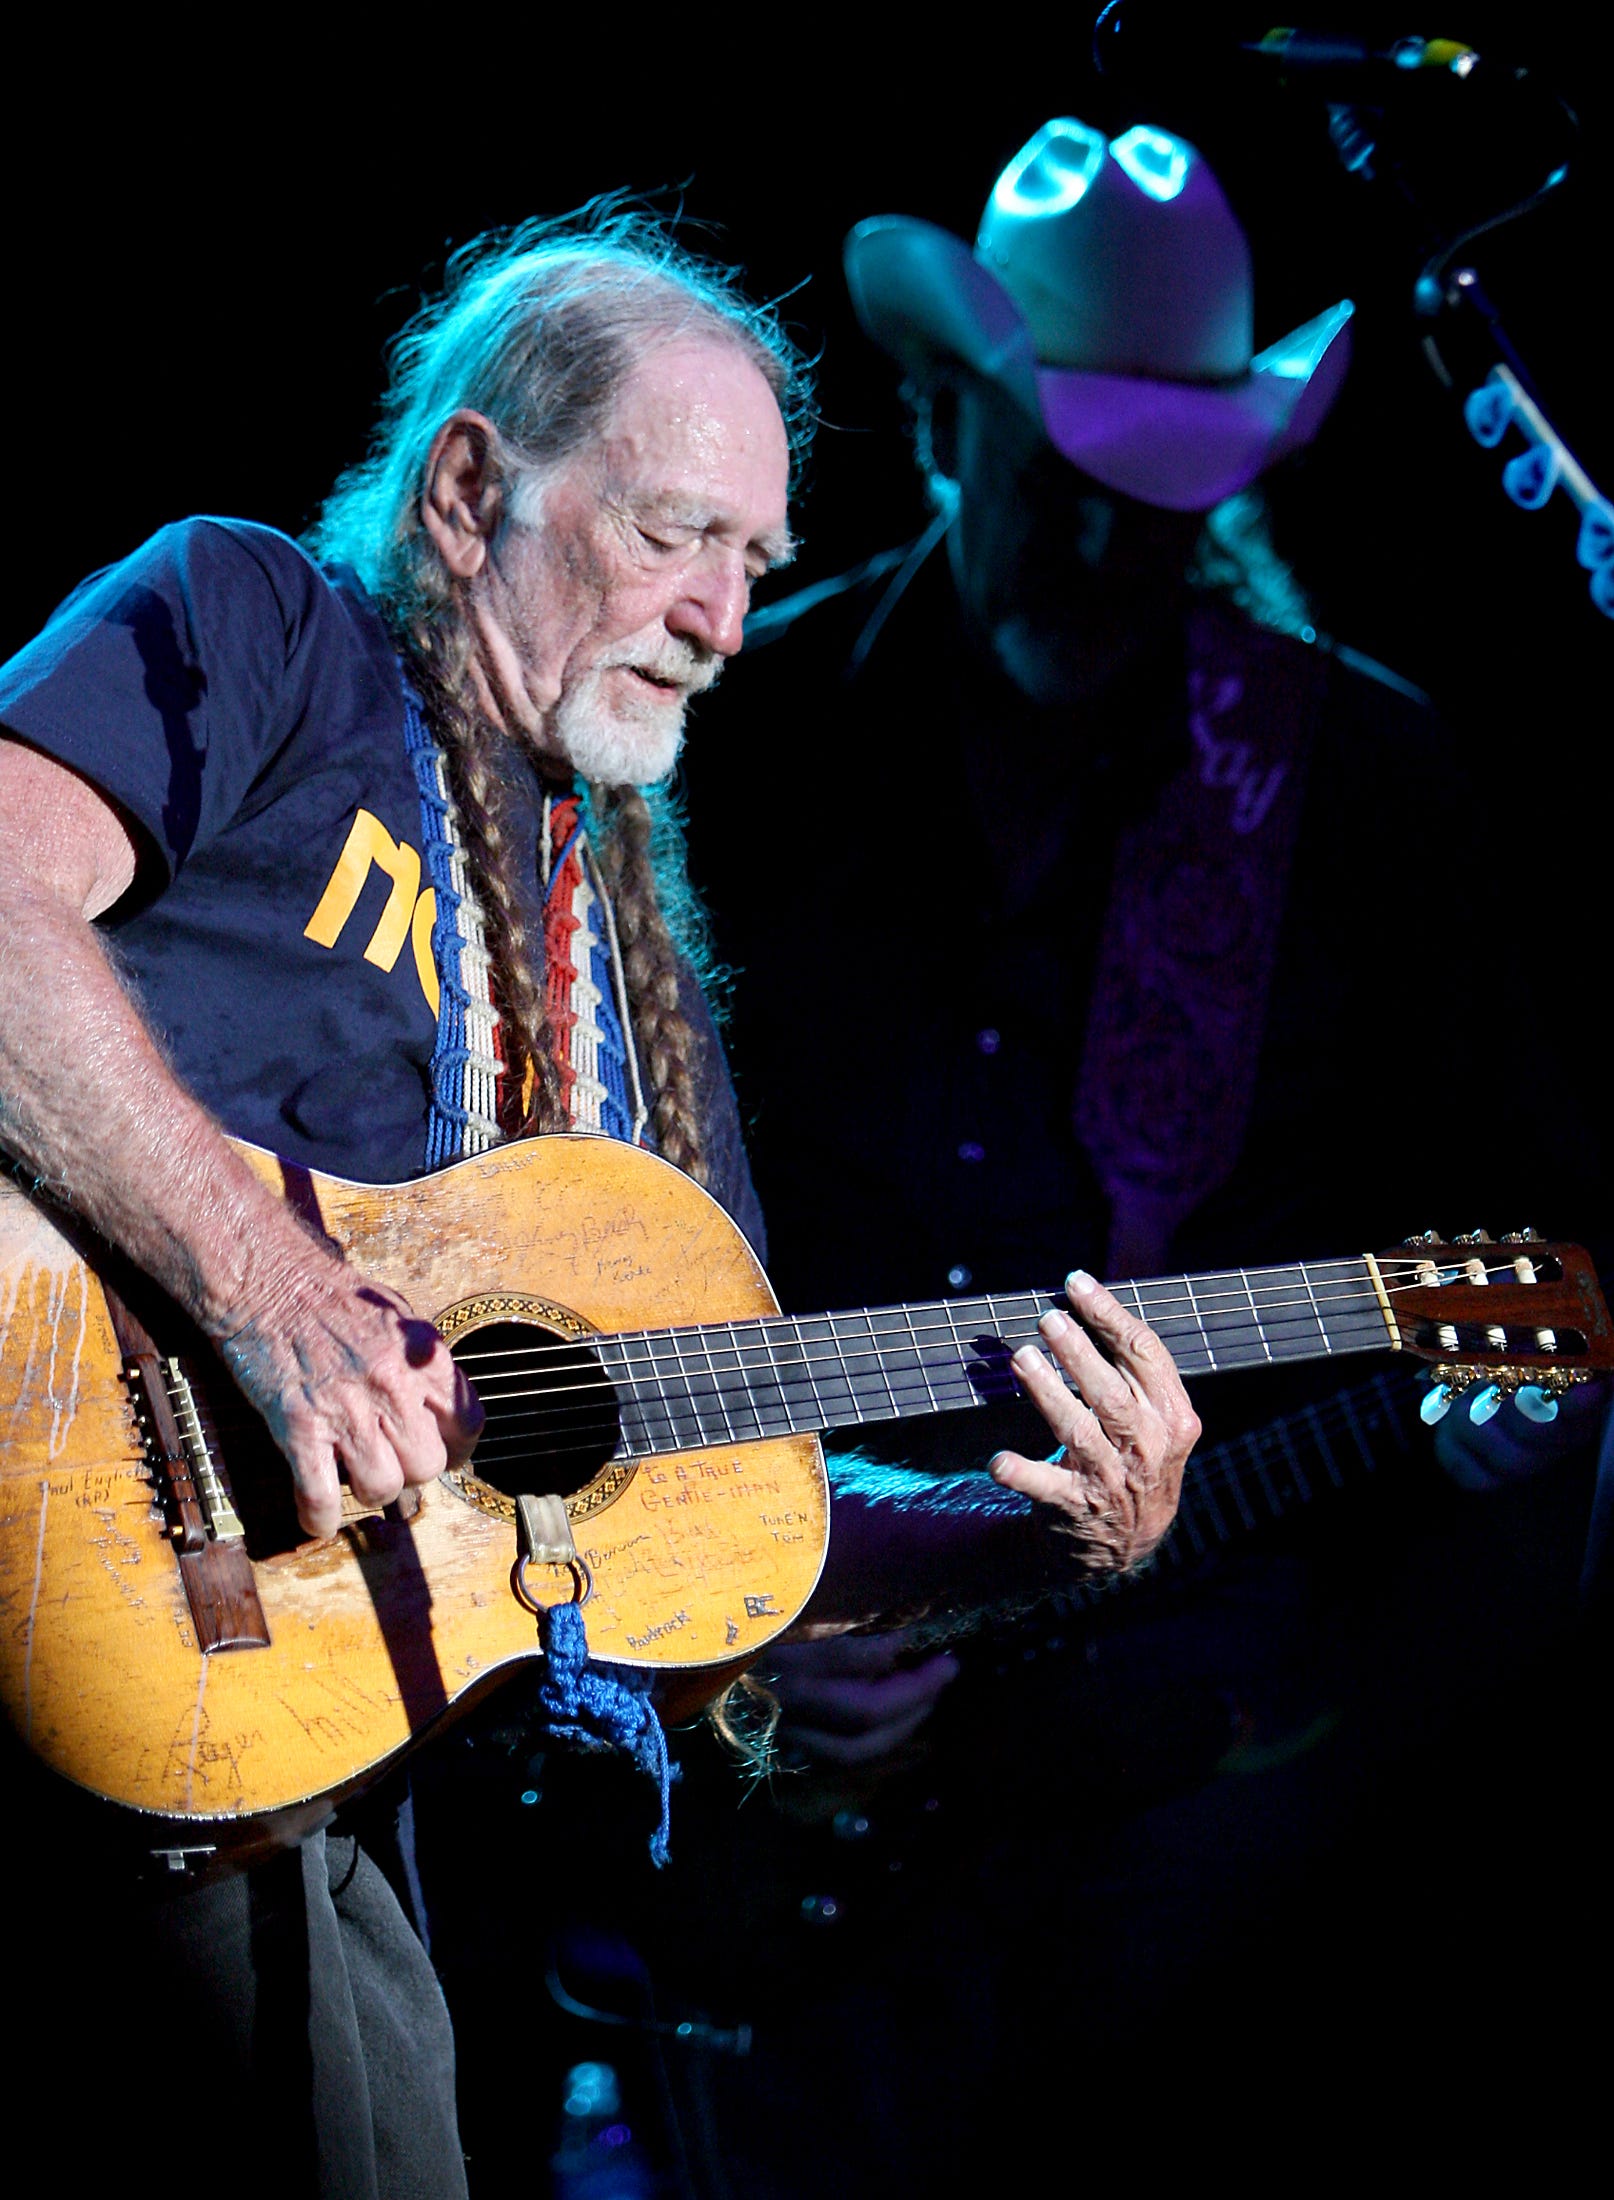 Willie Nelson at the Back Yard in Austin on August 10, 2007, with Ray Benson joining in at background right.